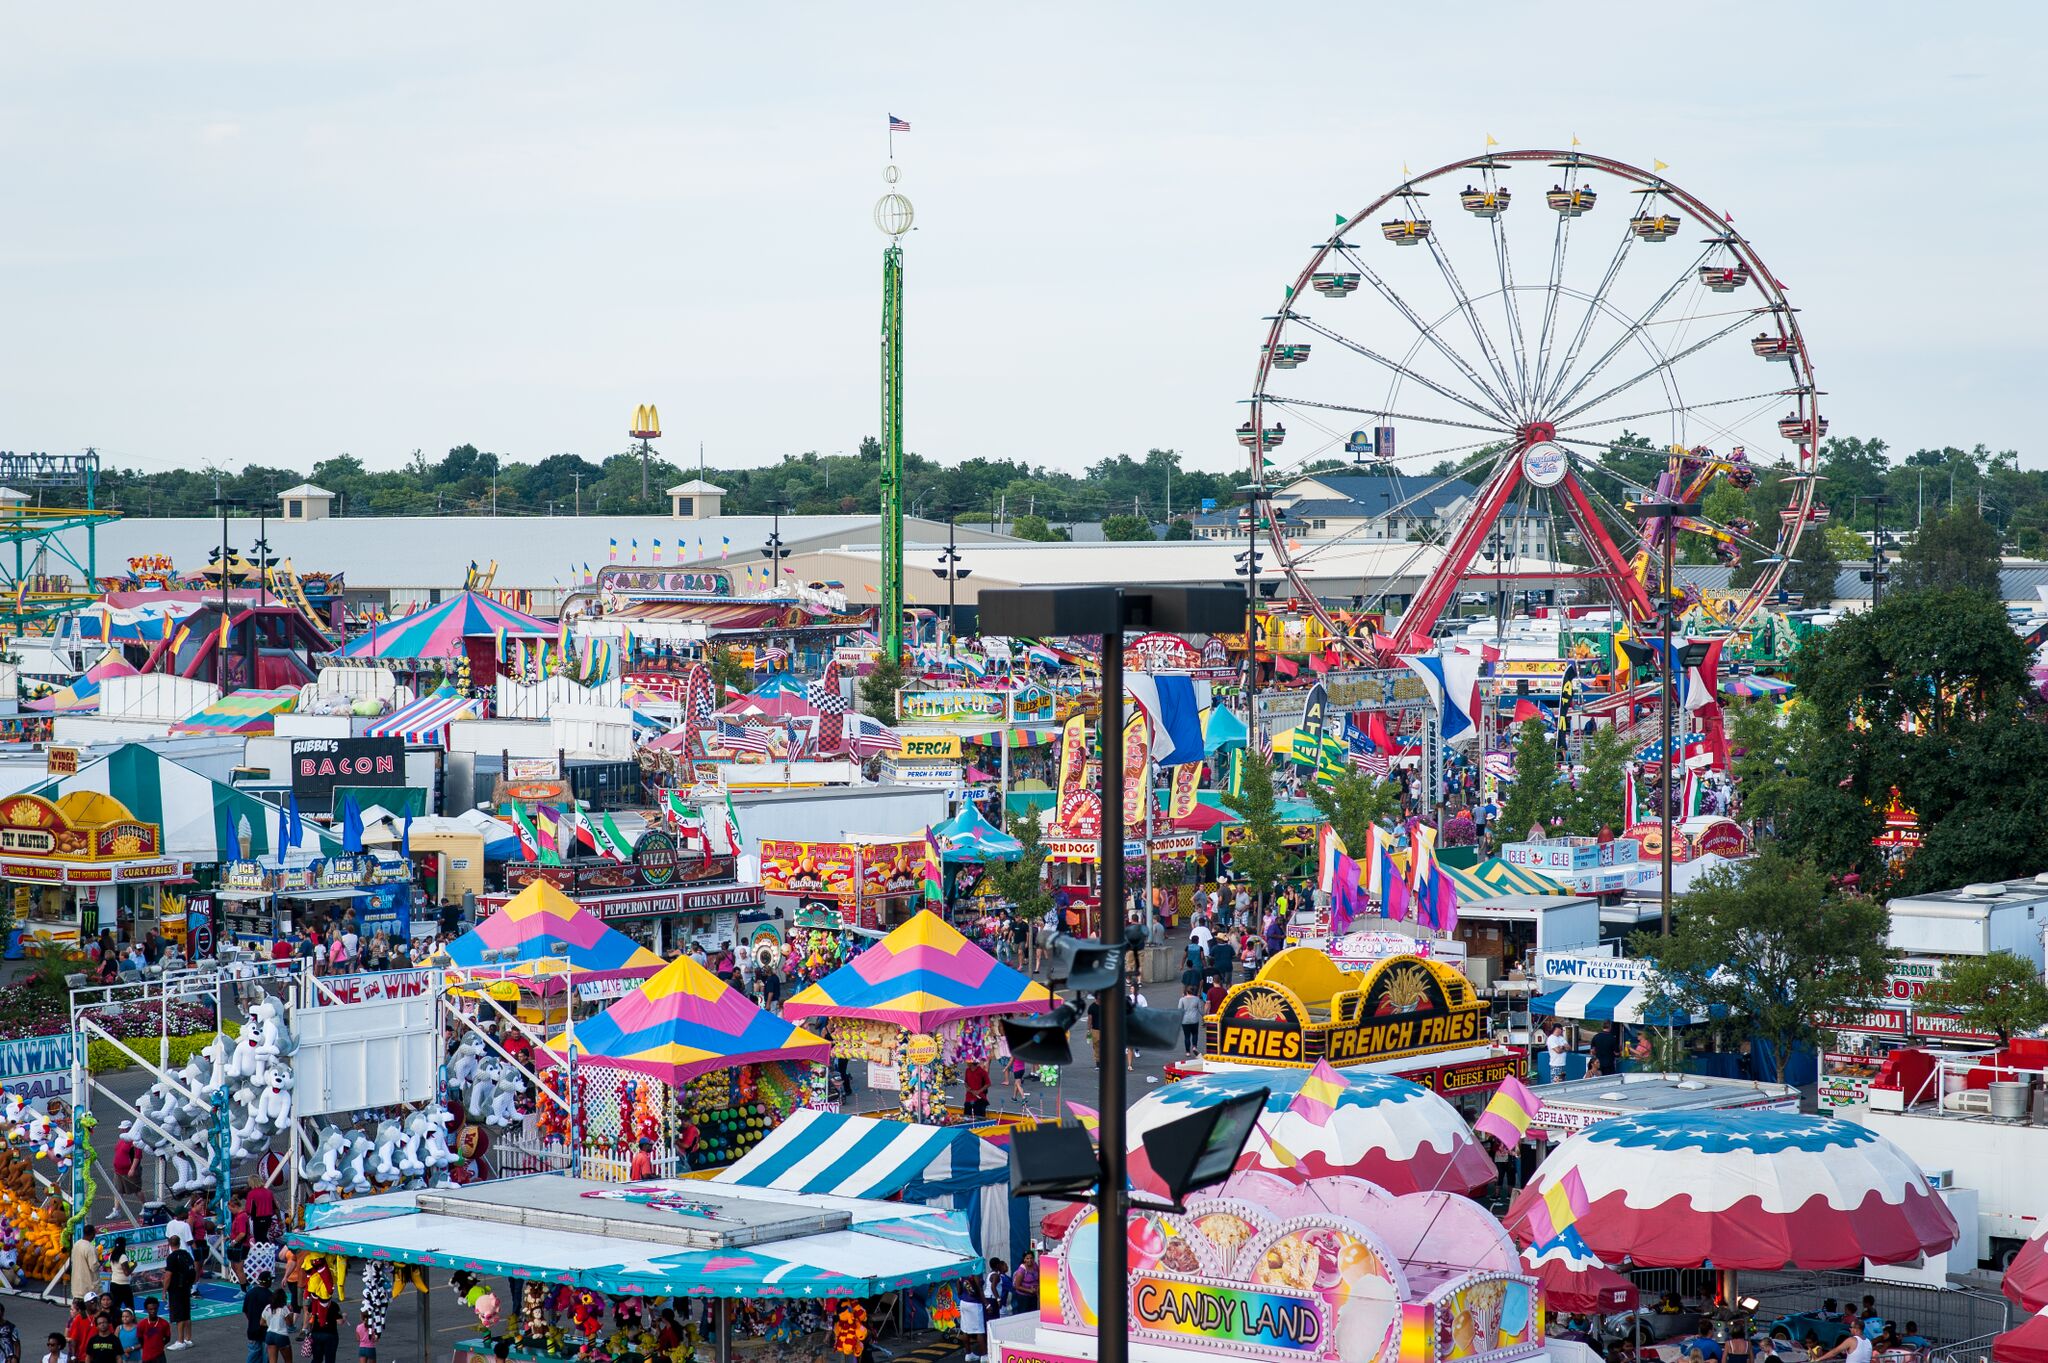 2018 Ohio State Fair comes to a close with more than 908,000 visitors